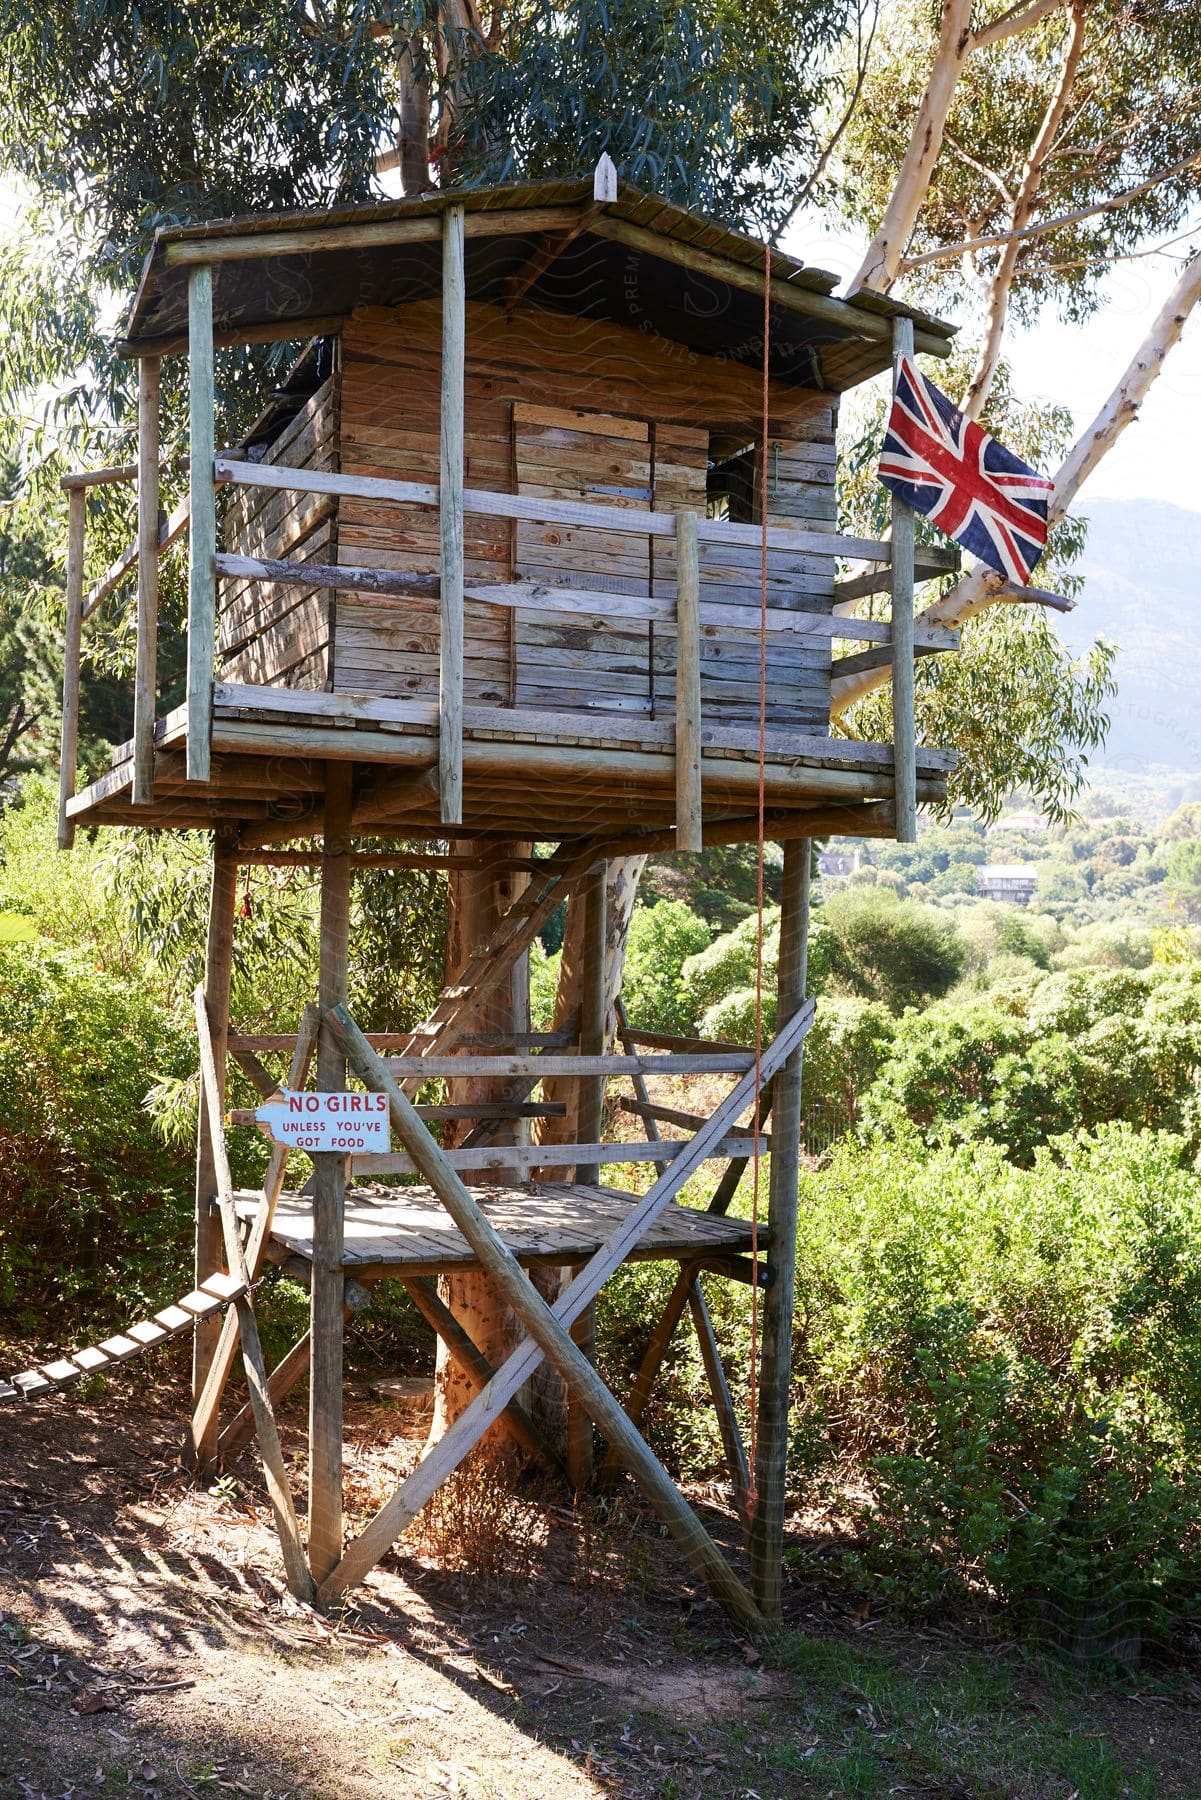 A wooden playhouse tower next to a tree with a british flag